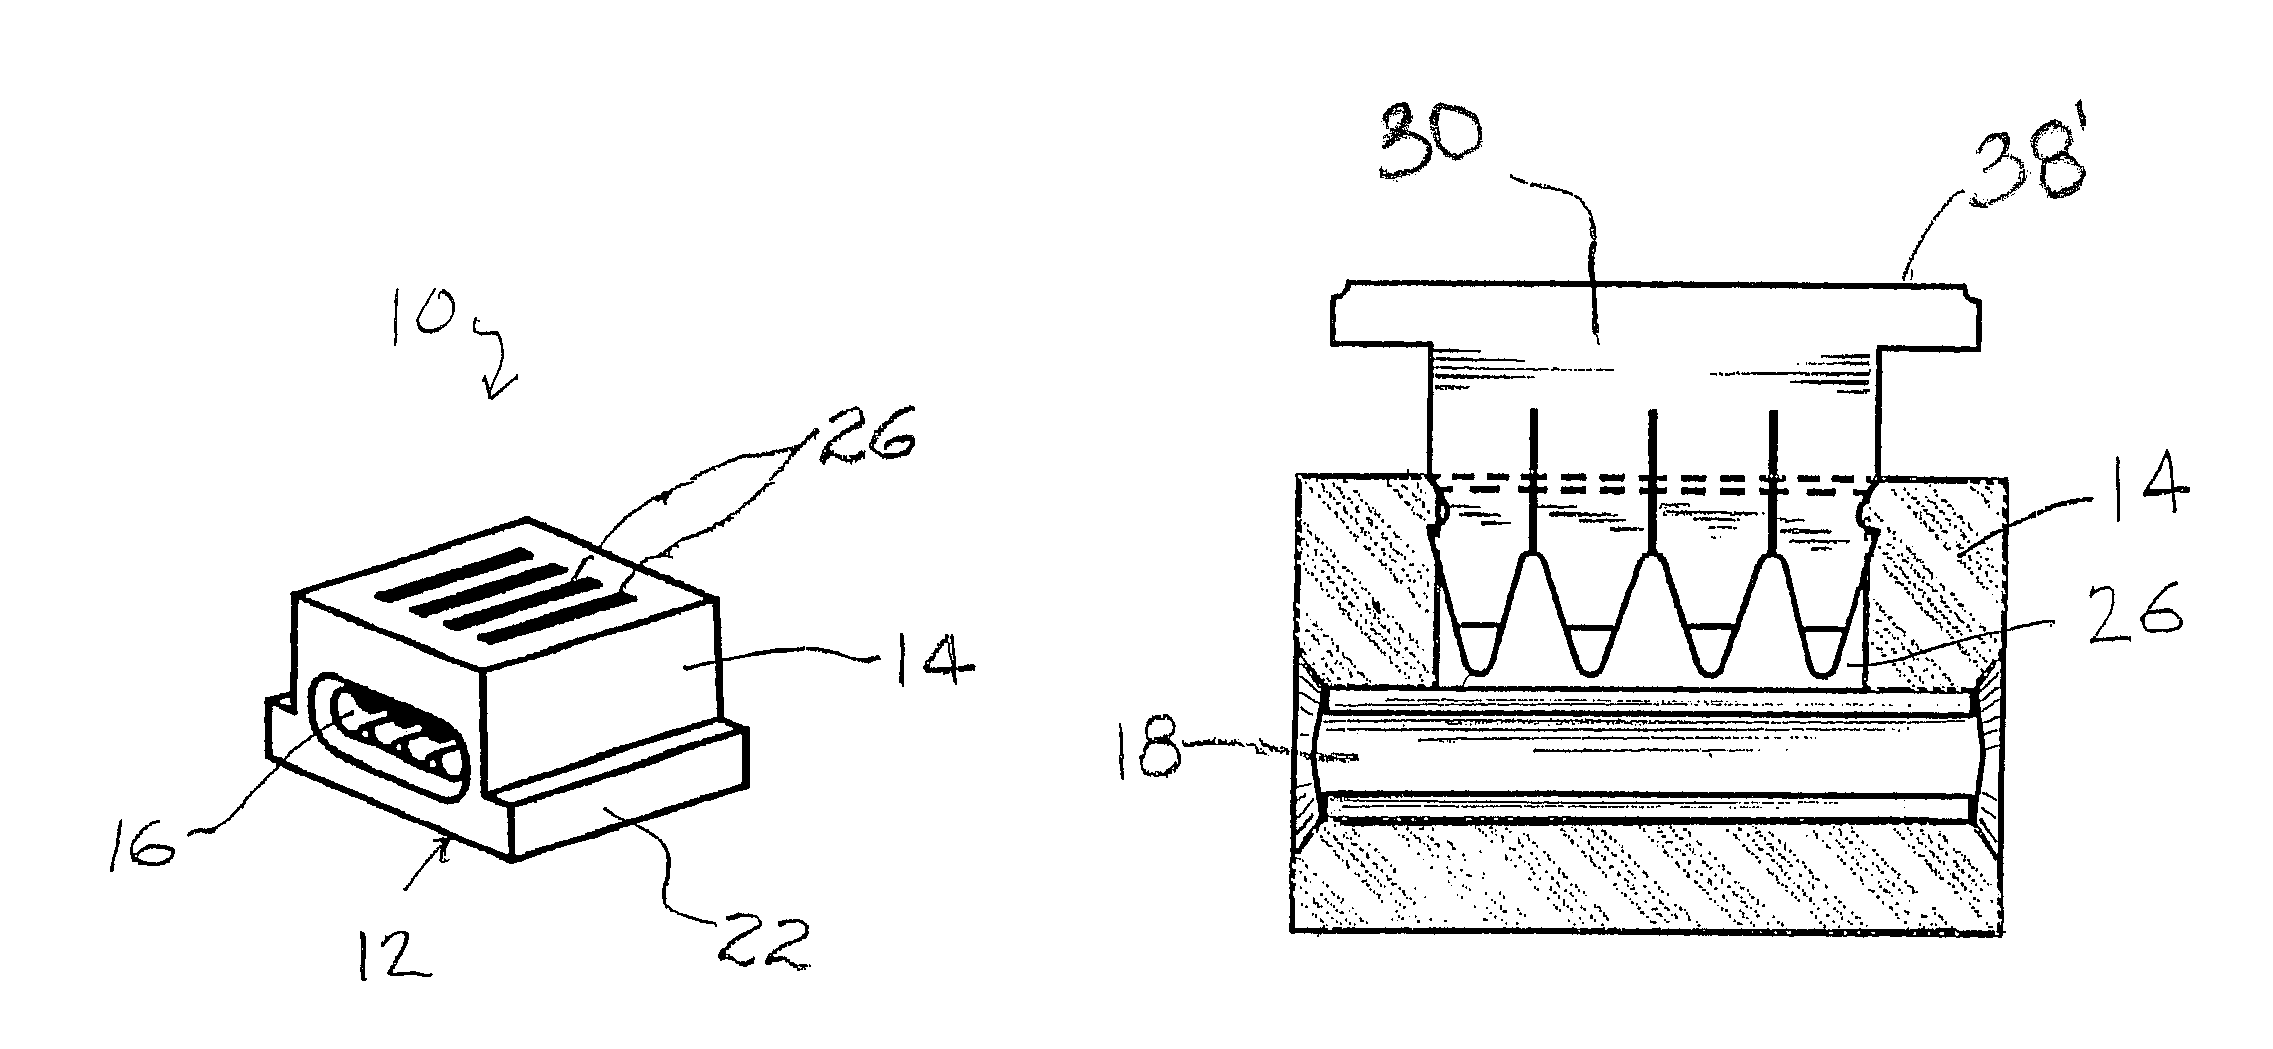 Insulation displacement connector assembly and system adapted for surface mounting on printed circuit board and method of using same